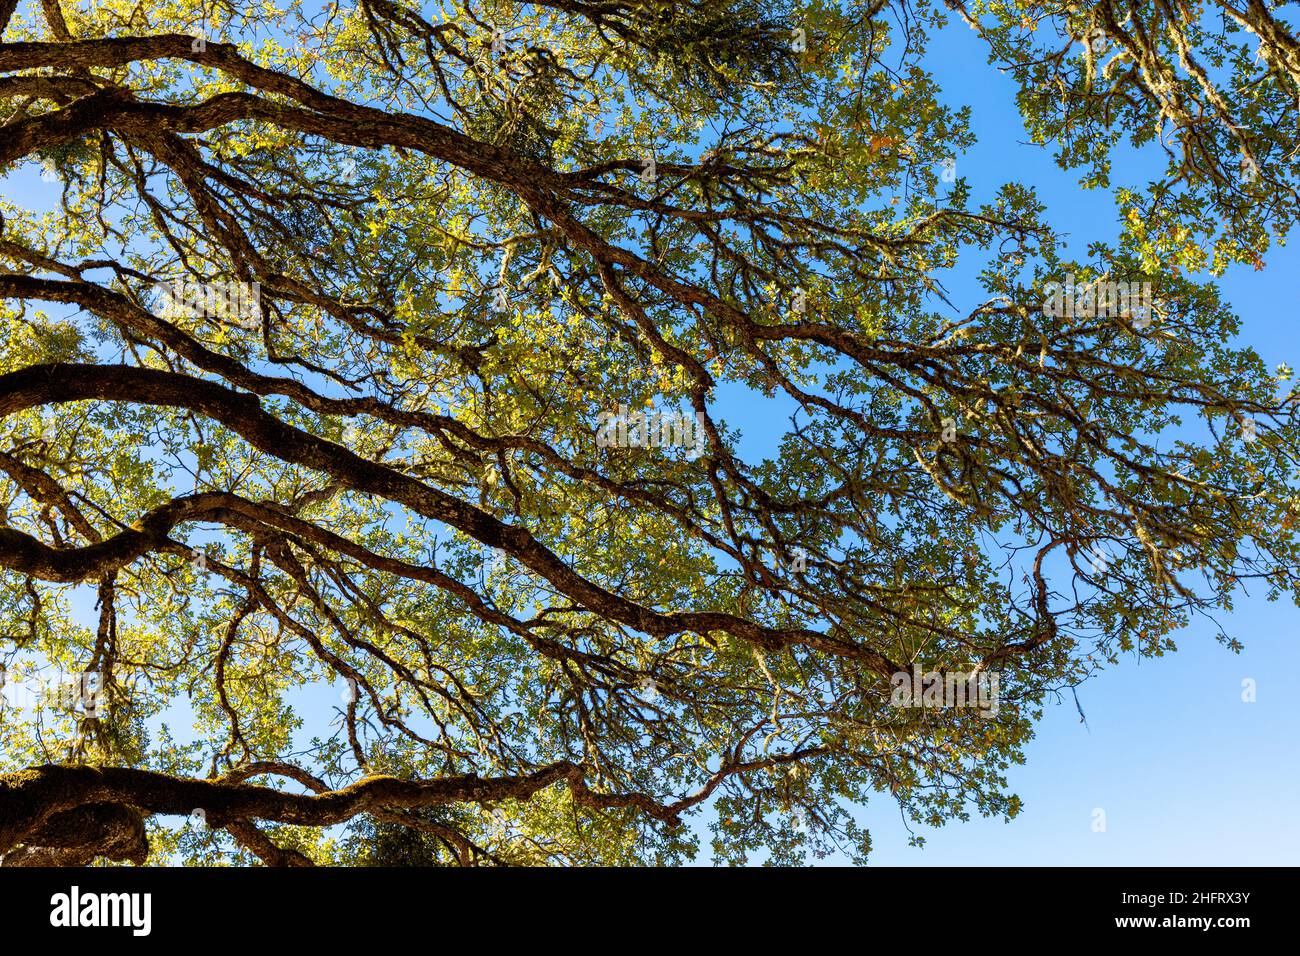 Oak tree branches against a blue sky, Northern California, USA Stock Photo